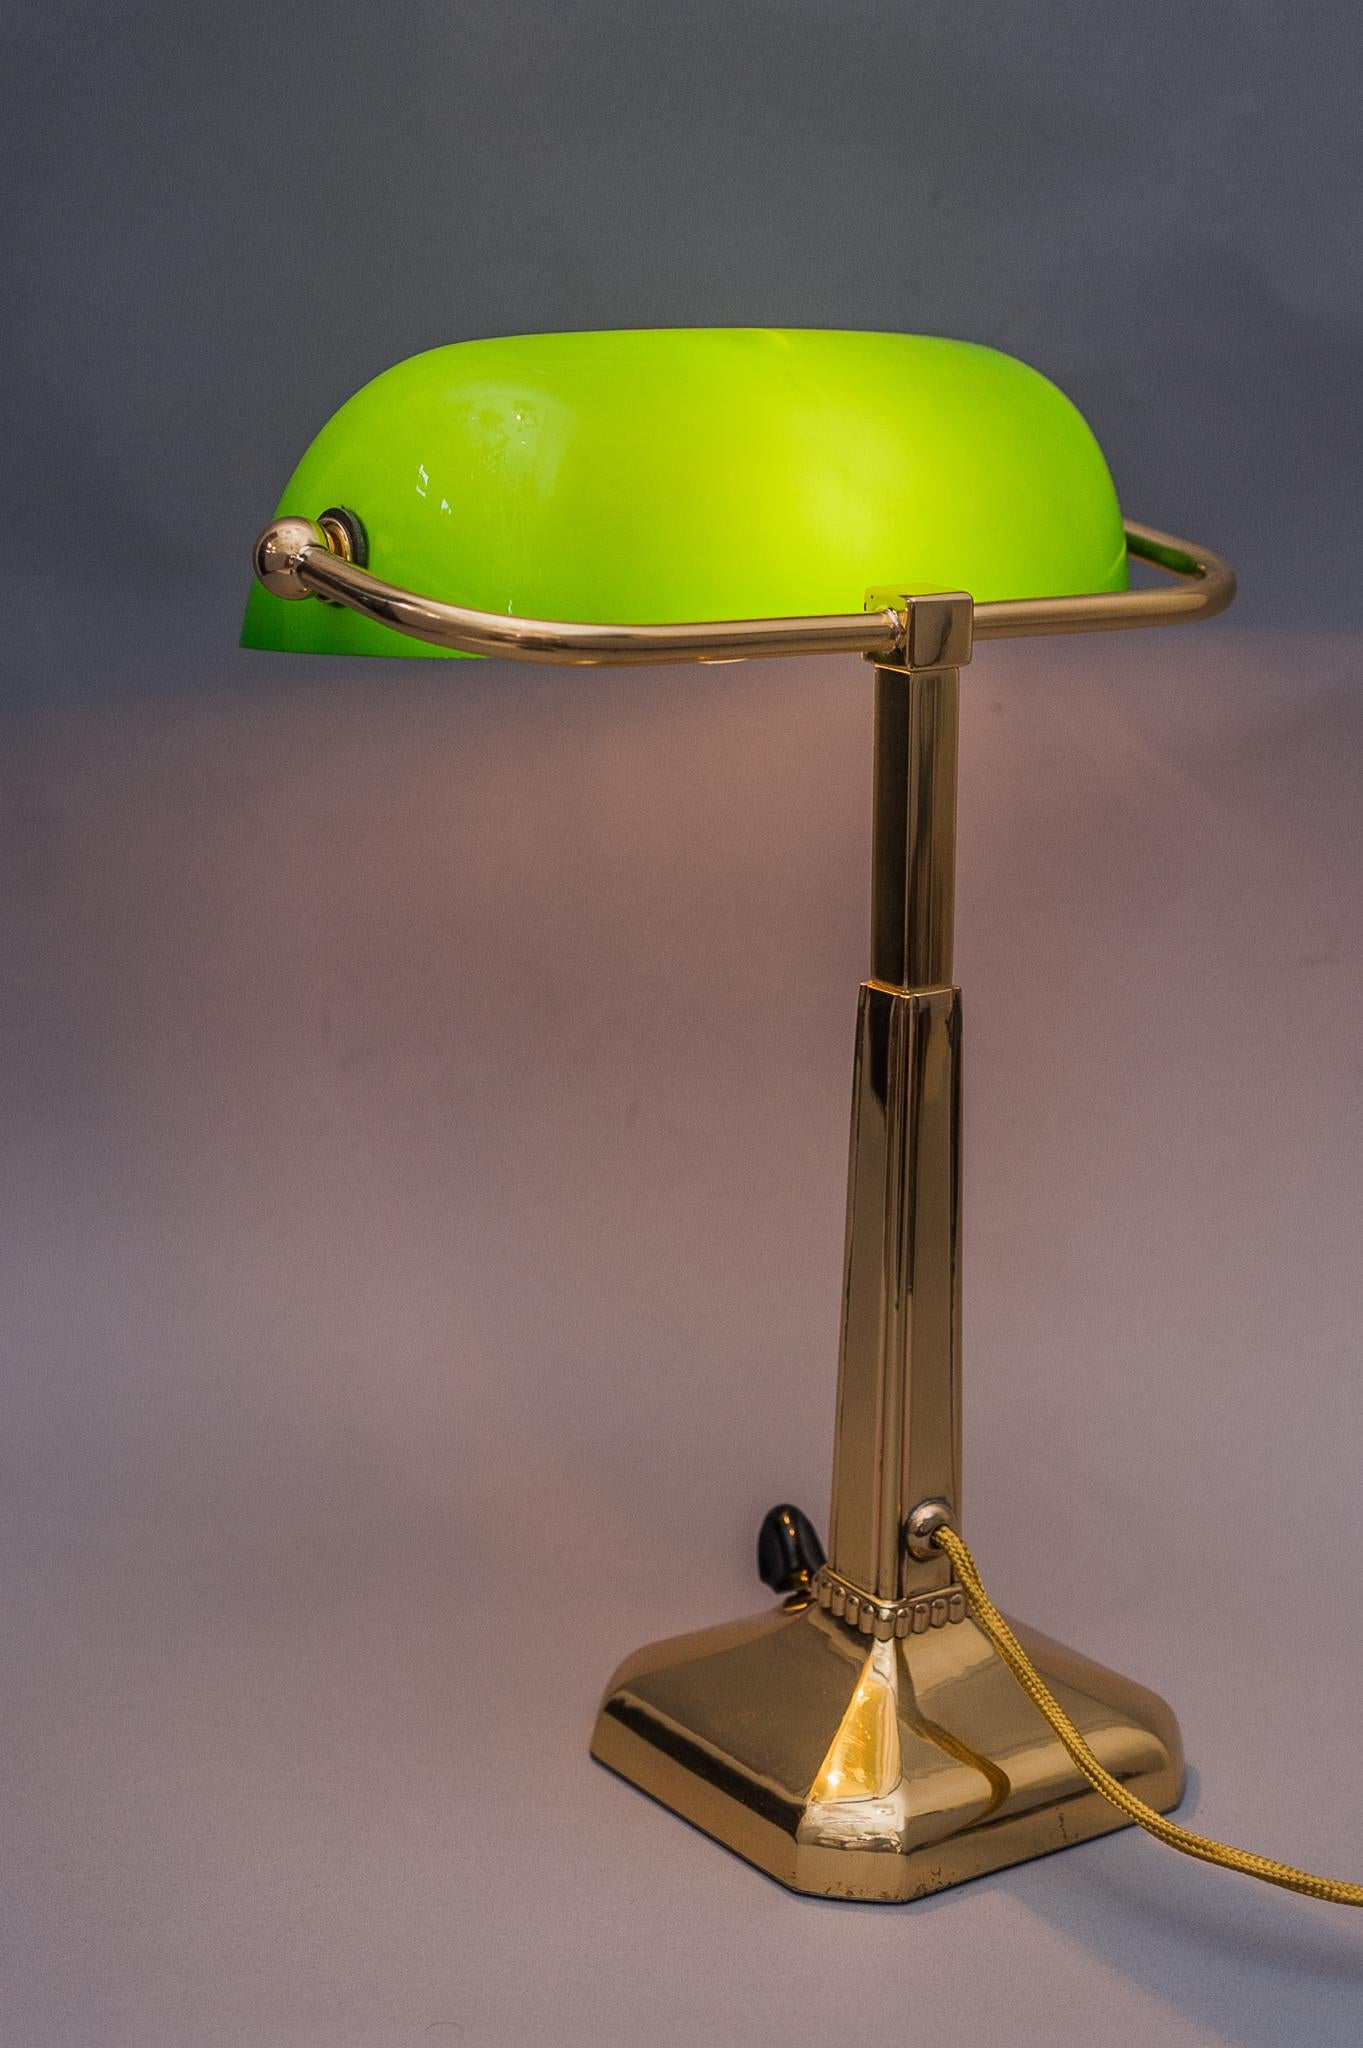 Art Deco table lamp with green shade.
Polished and stove enameled.

Glass shade is replaced (new).